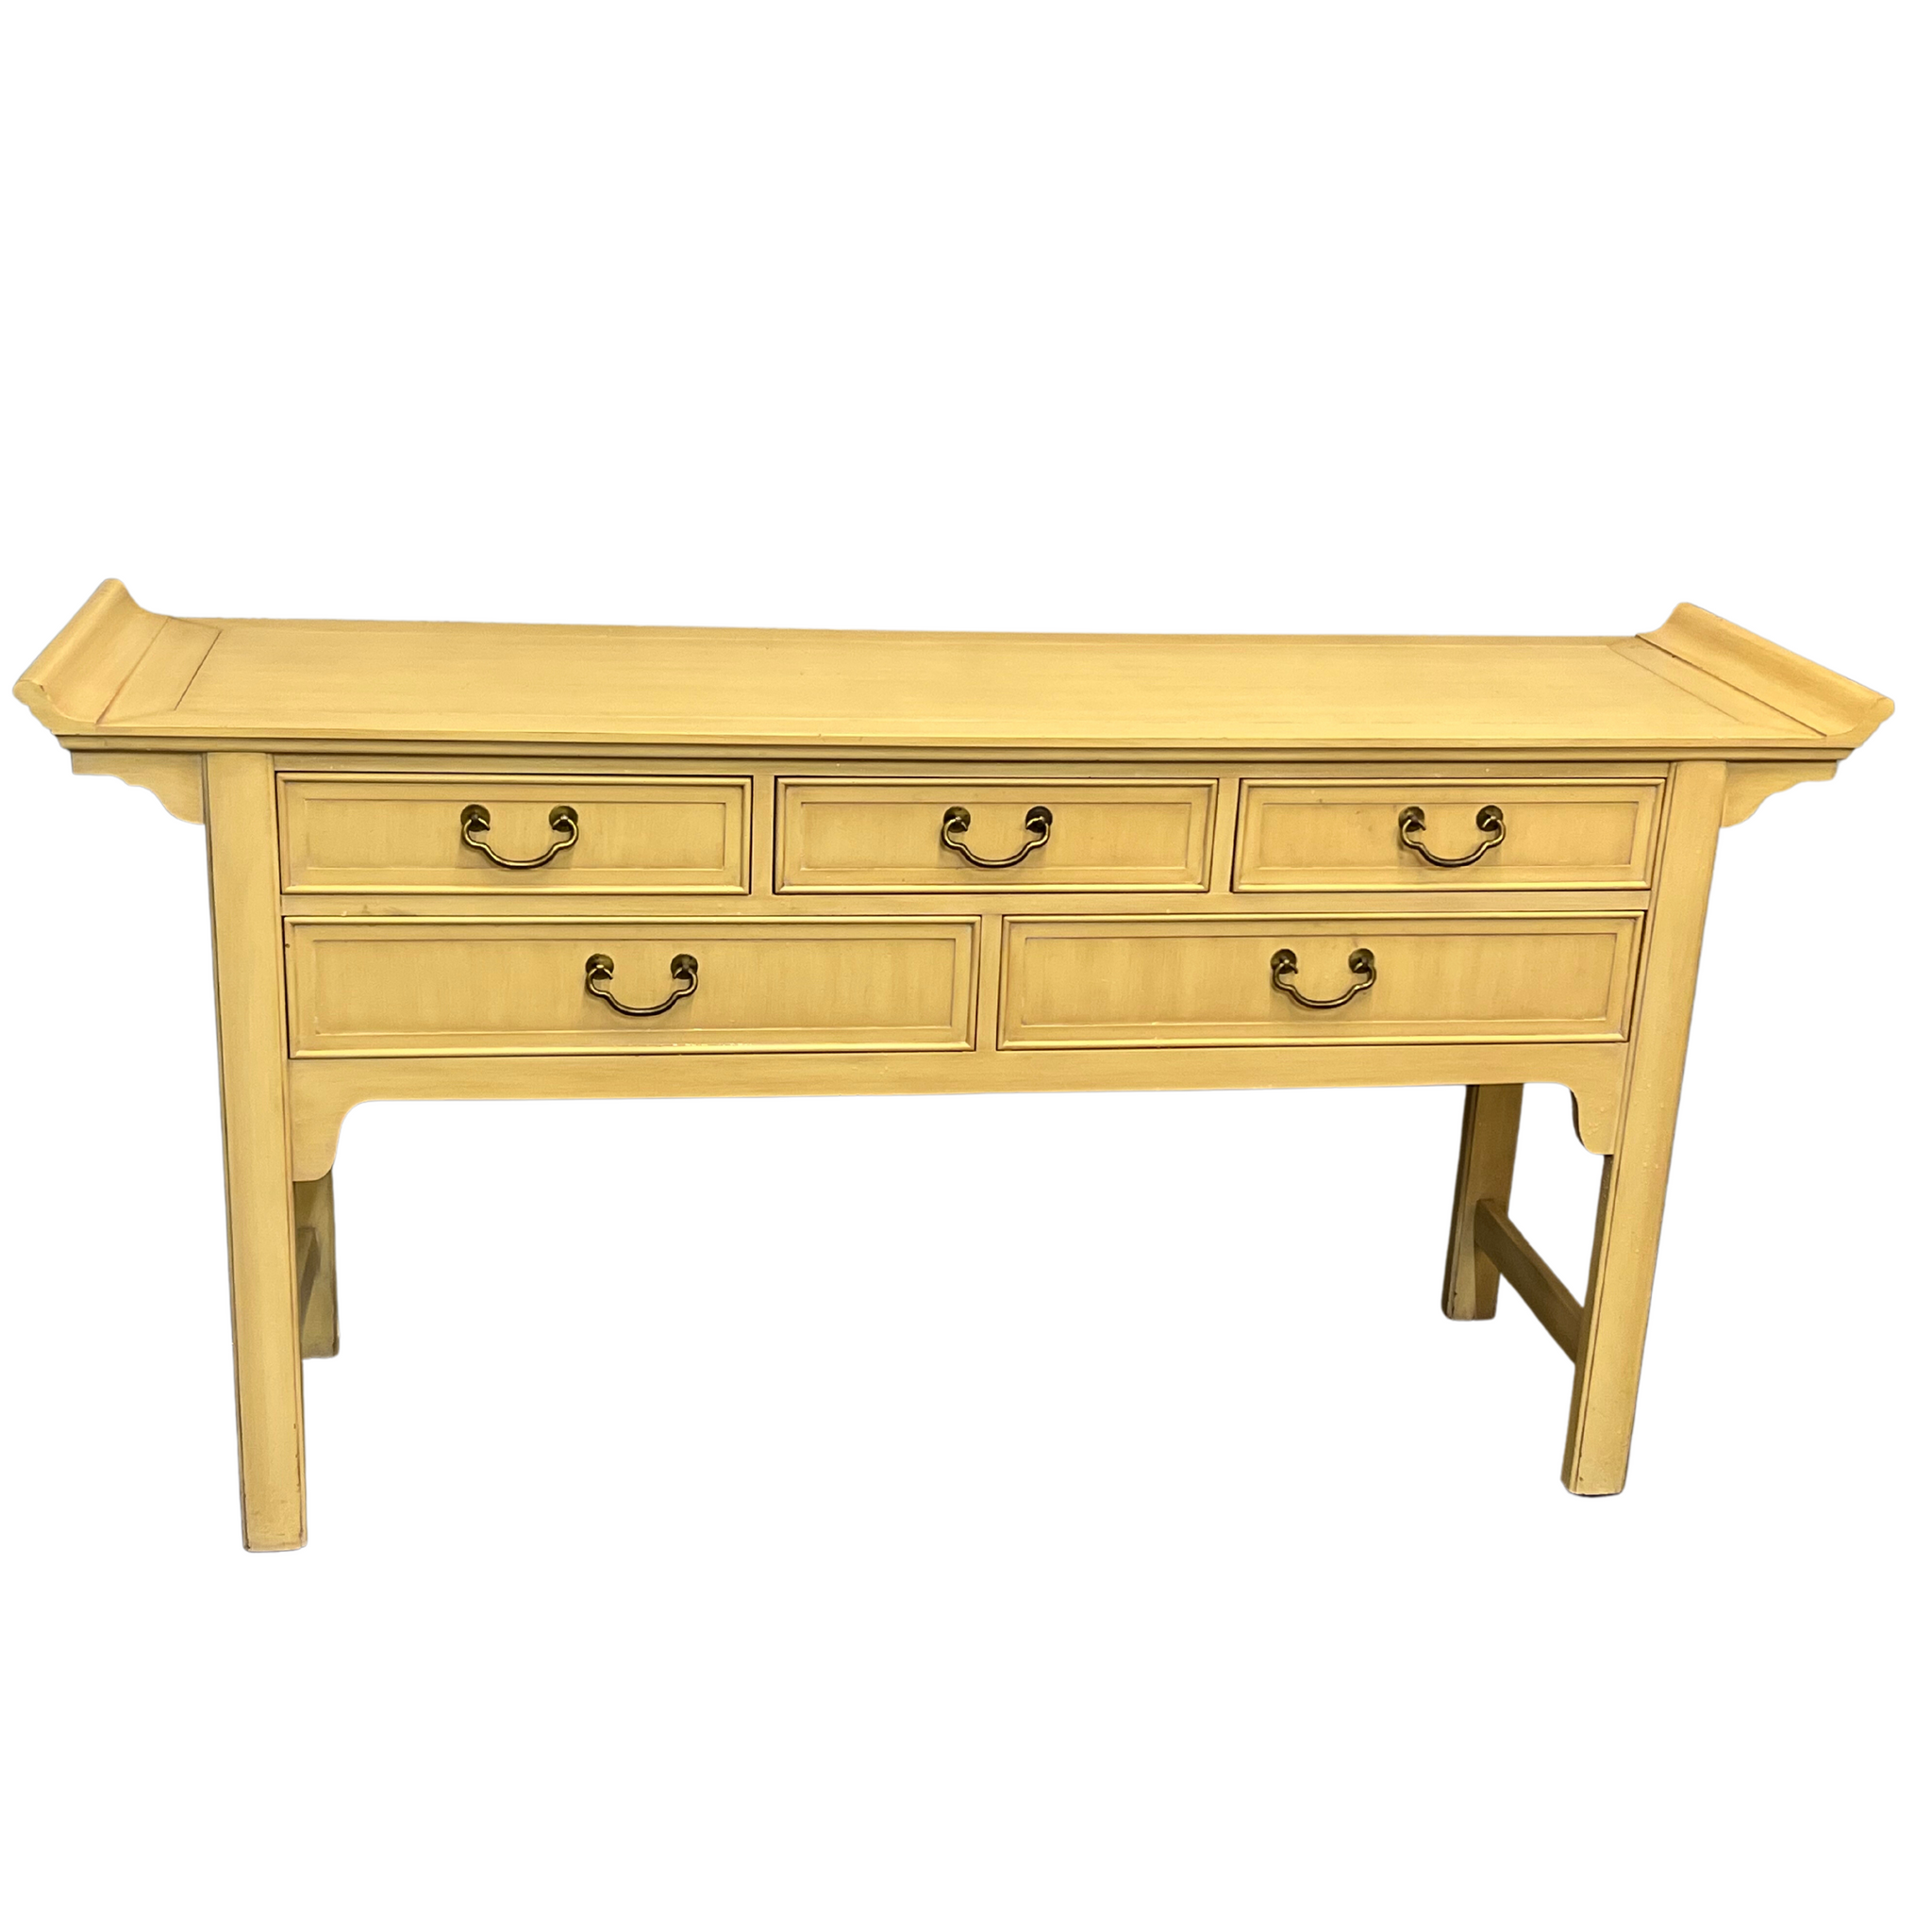 Vintage Hekman Furniture Pagoda Style Buffett Console Available for Lacquer!